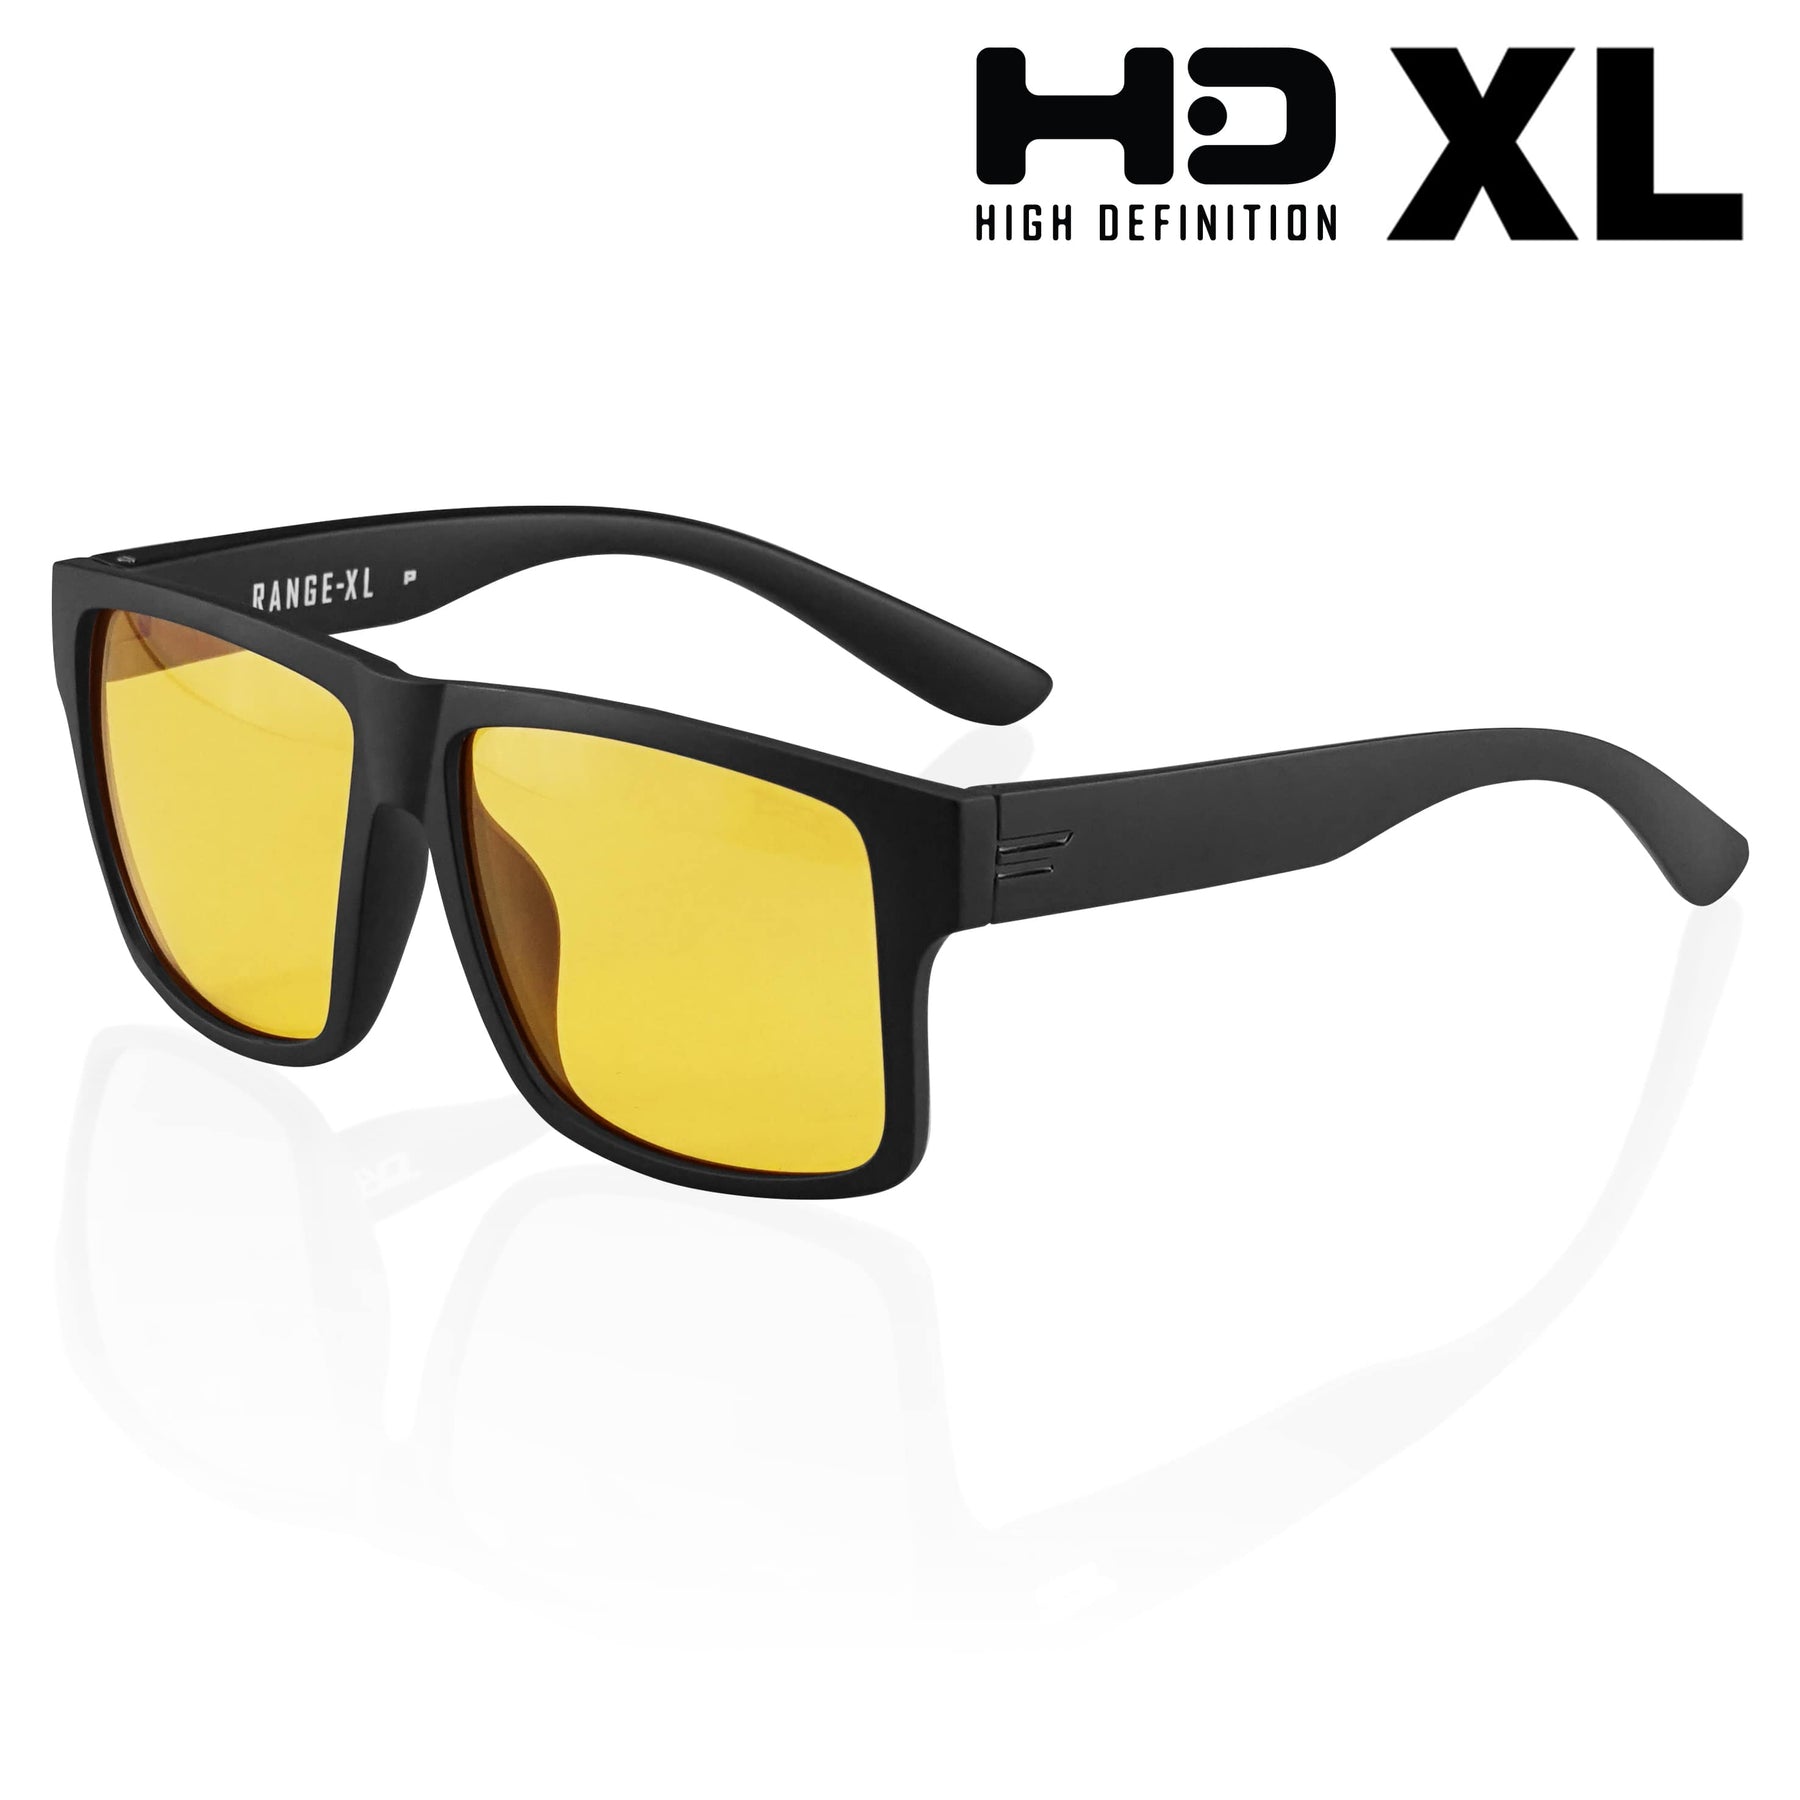 High Definition sunglasses NIGHT DRIVING EXTRA LARGE HD Polarized